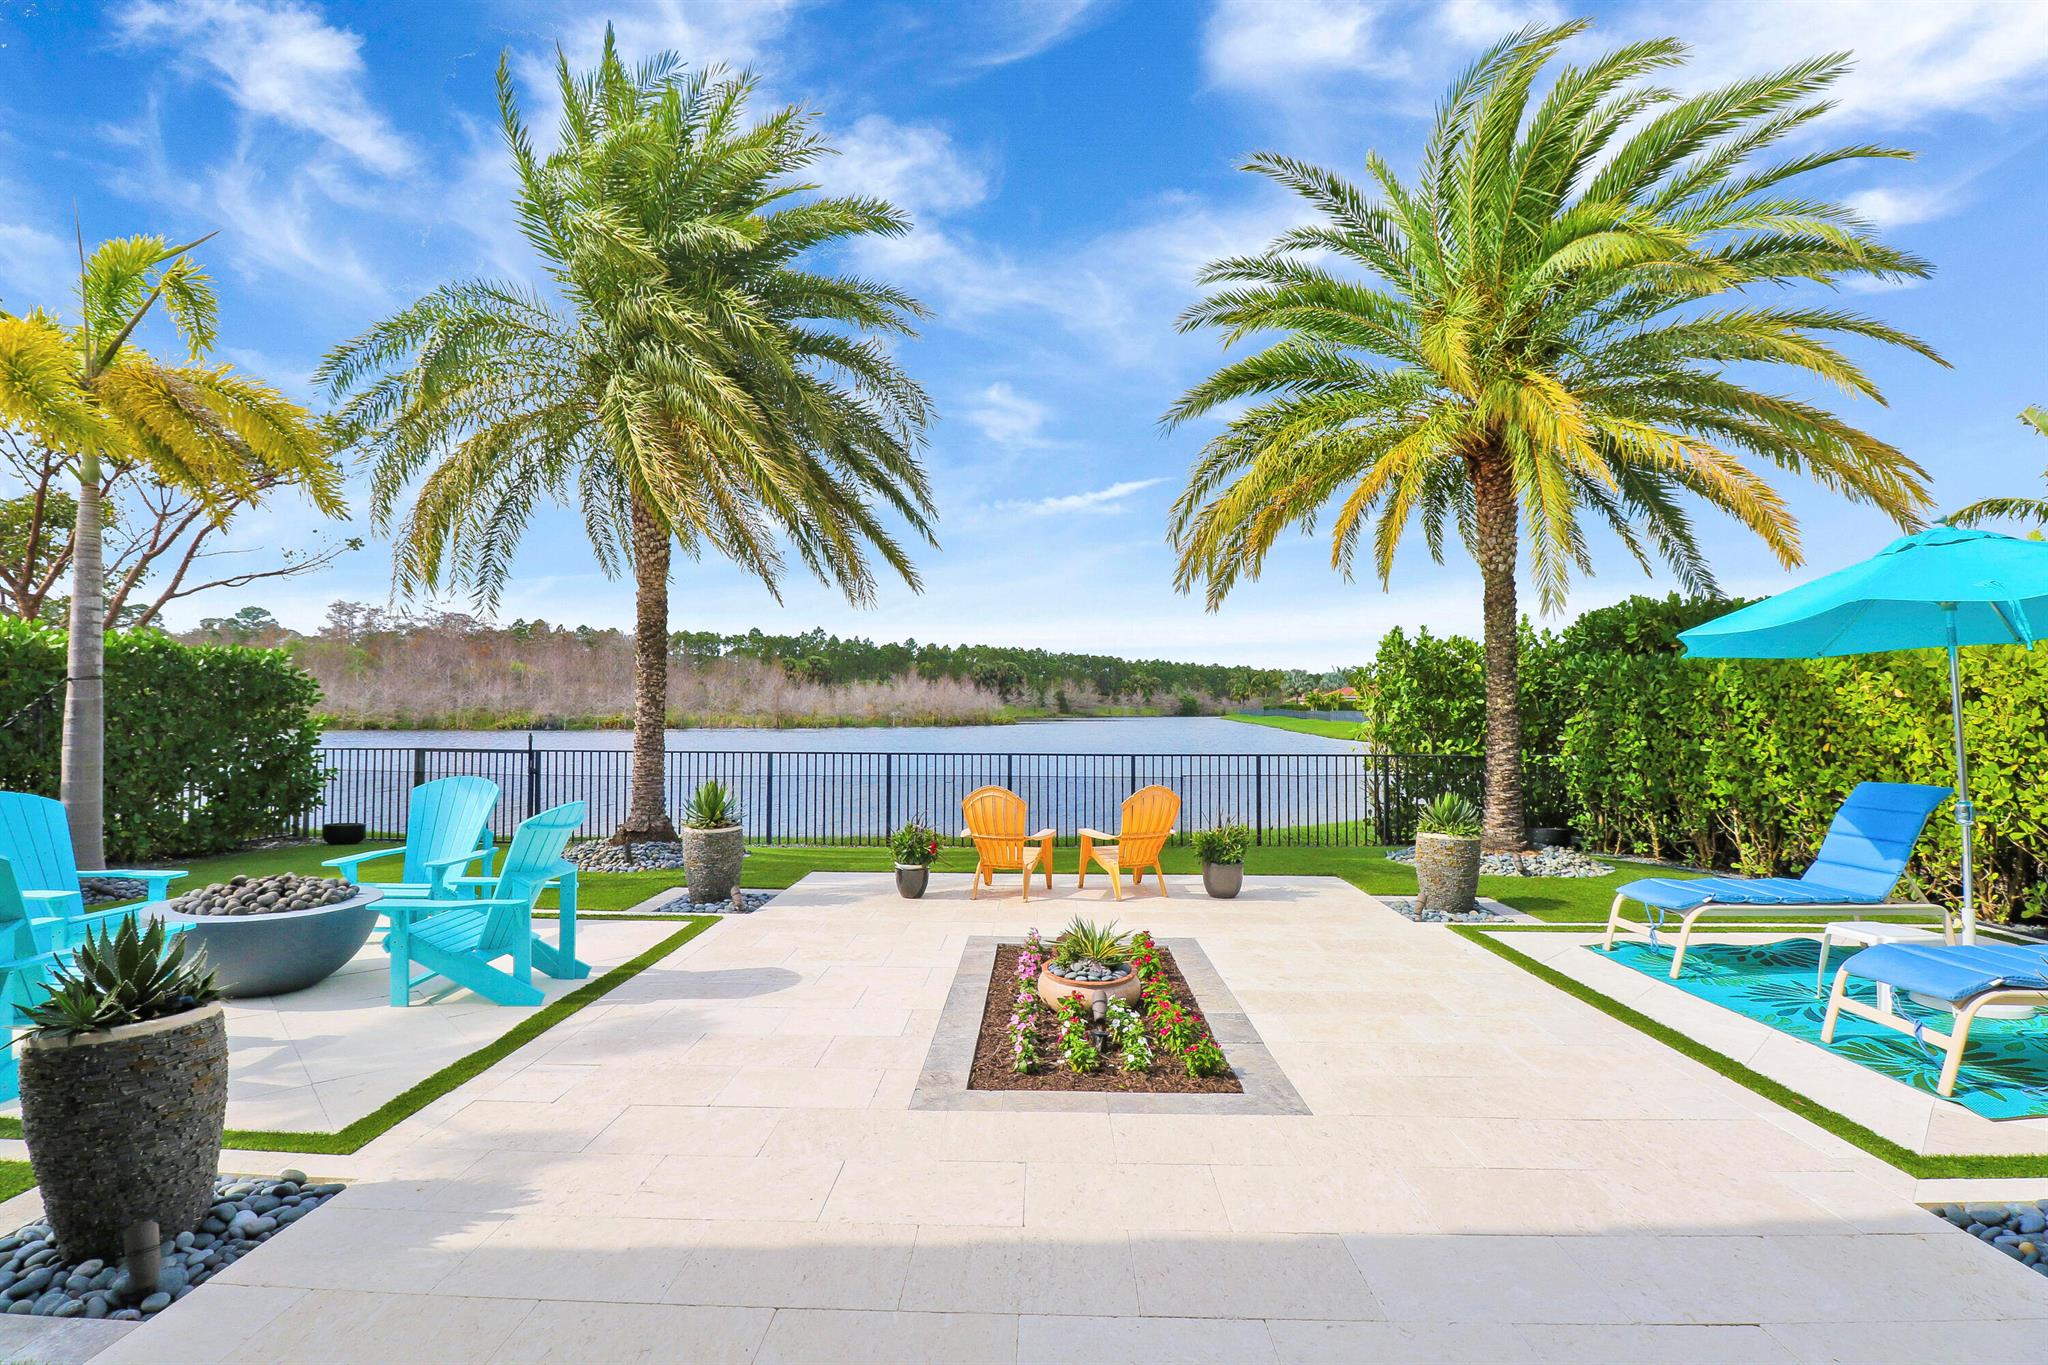 Welcome to your lakeside paradise in Jupiter Country Club. This stunning Saranac model by Toll Brothers offers a tranquil retreat with breathtaking views of the lake and Riverbend Park. Built in 2014, this home boasts 3 bedrooms, 2 1/2 bathrooms, and a den/office (or optional bedroom), providing ample space for comfortable living.  From the moment you open the front door, you are captivated by the views that are second to none!  Enjoy a spacious home with tons of natural sunlight, creating a perfect setting for relaxation and entertainment. The well-appointed kitchen features a huge granite island, gas range, tons of storage, full pantry, dining room and more, making it ideal for both everyday living and hosting guests.You will spend your days outside enjoying the relaxing well-thought out space! The patio and back yard are an absolute paradise, featuring travertine decking with turf, tropical landscaping, a fire pit, and multiple seating areas. The patio also boasts tongue and groove ceilings, a motorized screen, giving you the ability to open the space completely when desired. The private back yard and large side yard are fully fenced to offer a sense of seclusion and security. 

Additional features include impact glass, a new AC (2024), freshly painted exterior, and an air-conditioned garage with split AC and extra storage. The home also boasts a new hot water heater, making it move-in ready for its new owners.

With its serene setting and modern comforts, this home is perfect for those seeking a lock-and-leave lifestyle or a peaceful full-time residence. Don't miss the opportunity to make this home your own.

Jupiter Country Club is a luxurious private country club offering world-class amenities and an exclusive community of single-family homes and carriage homes. The Grand Clubhouse is a magnificent hub of activity, featuring impressive on-site dining and entertainment, bocce ball courts, fully stocked men's and women's locker rooms, as well as a golf shop for enthusiasts. For fitness enthusiasts, the Sports Club is a state-of-the-art facility equipped with everything needed to achieve your fitness goals. From free weights to cardio equipment, tennis, Pickleball, and multi-purpose sports courts, this facility offers a comprehensive range of options to cater to all fitness preferences. There are 2 pools and a Childrens playground.  The community has a 24 hour manned gate and roving security.  It is conveniently located just minutes to I95 and the Turnpike, as well as, a plethora of shops, dining and entertainment.